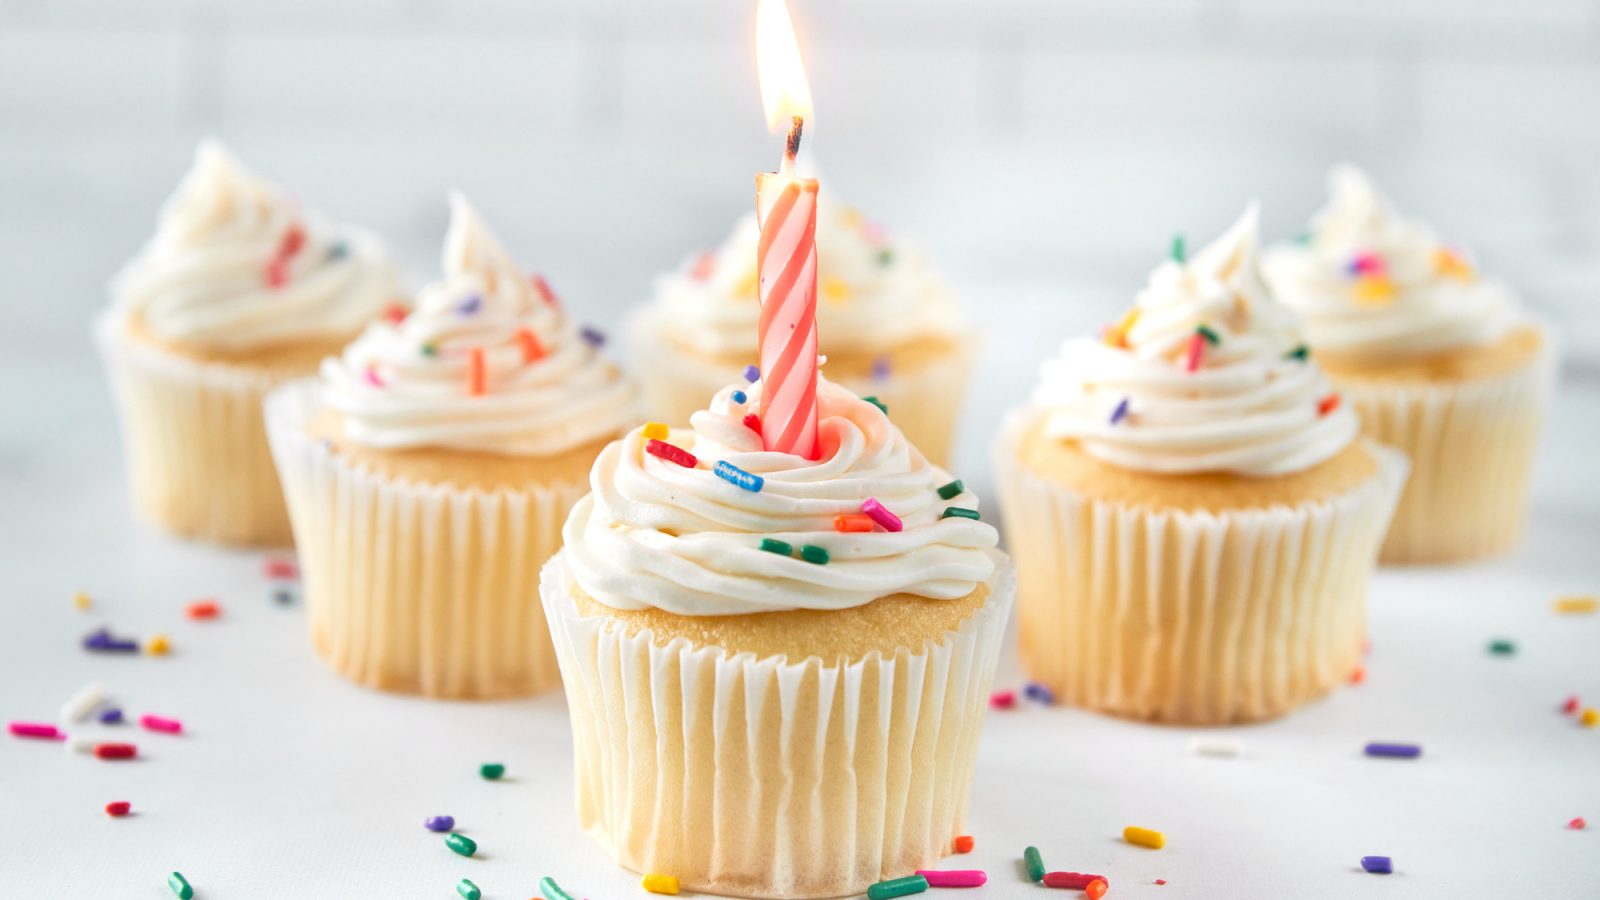 vegan vanilla cupcakes with a birthday candle